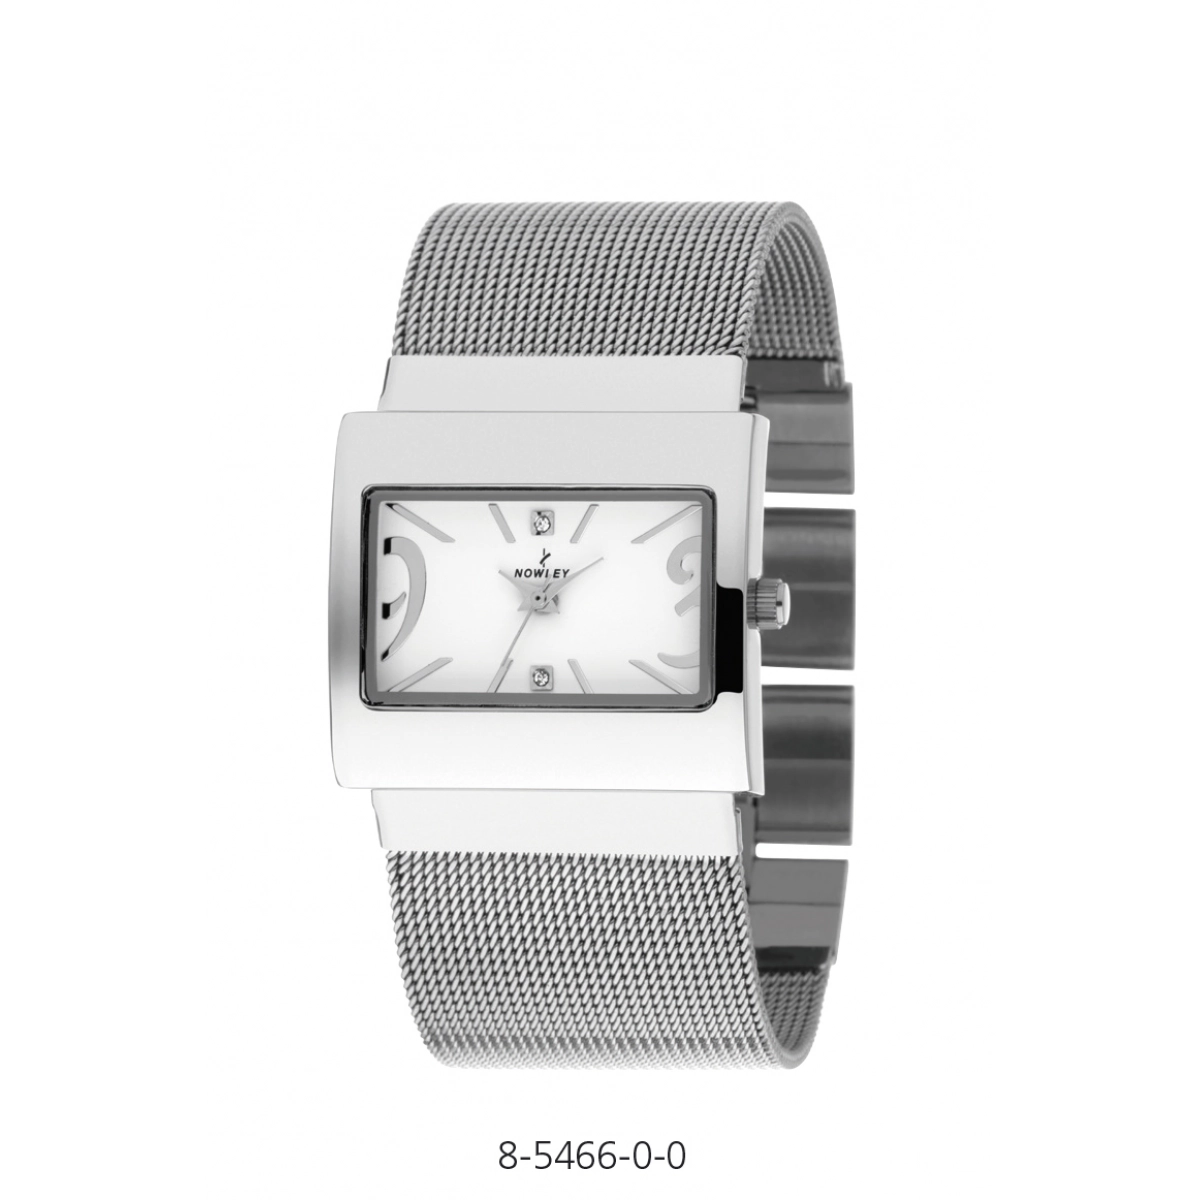 MONTRE NOWLEY CHIC 8-5466-0-0